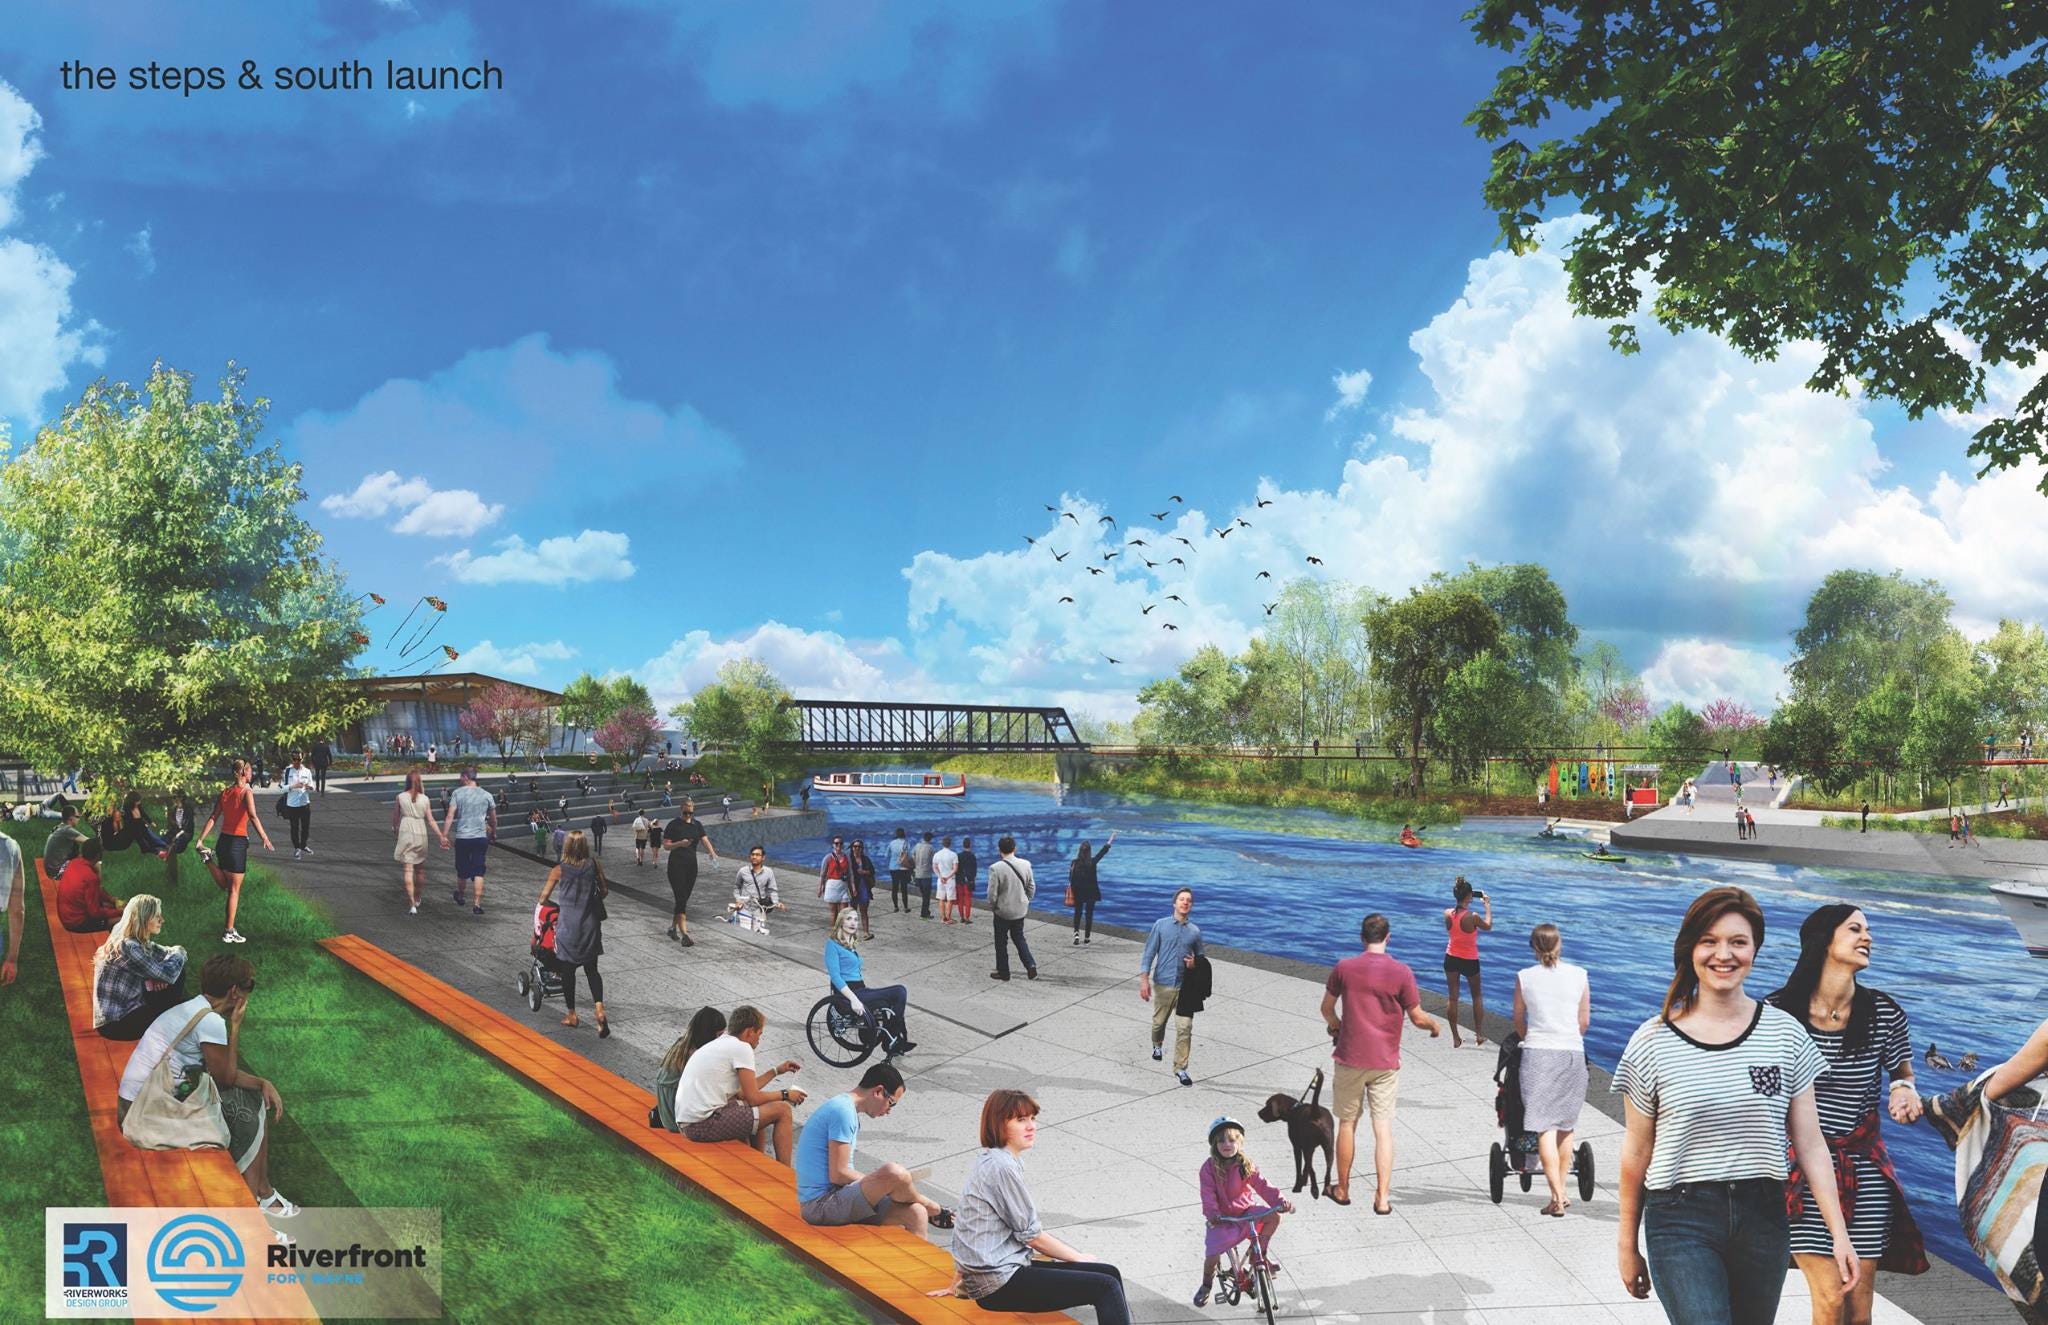 City, Landowners Reach Agreement on Riverfront Project